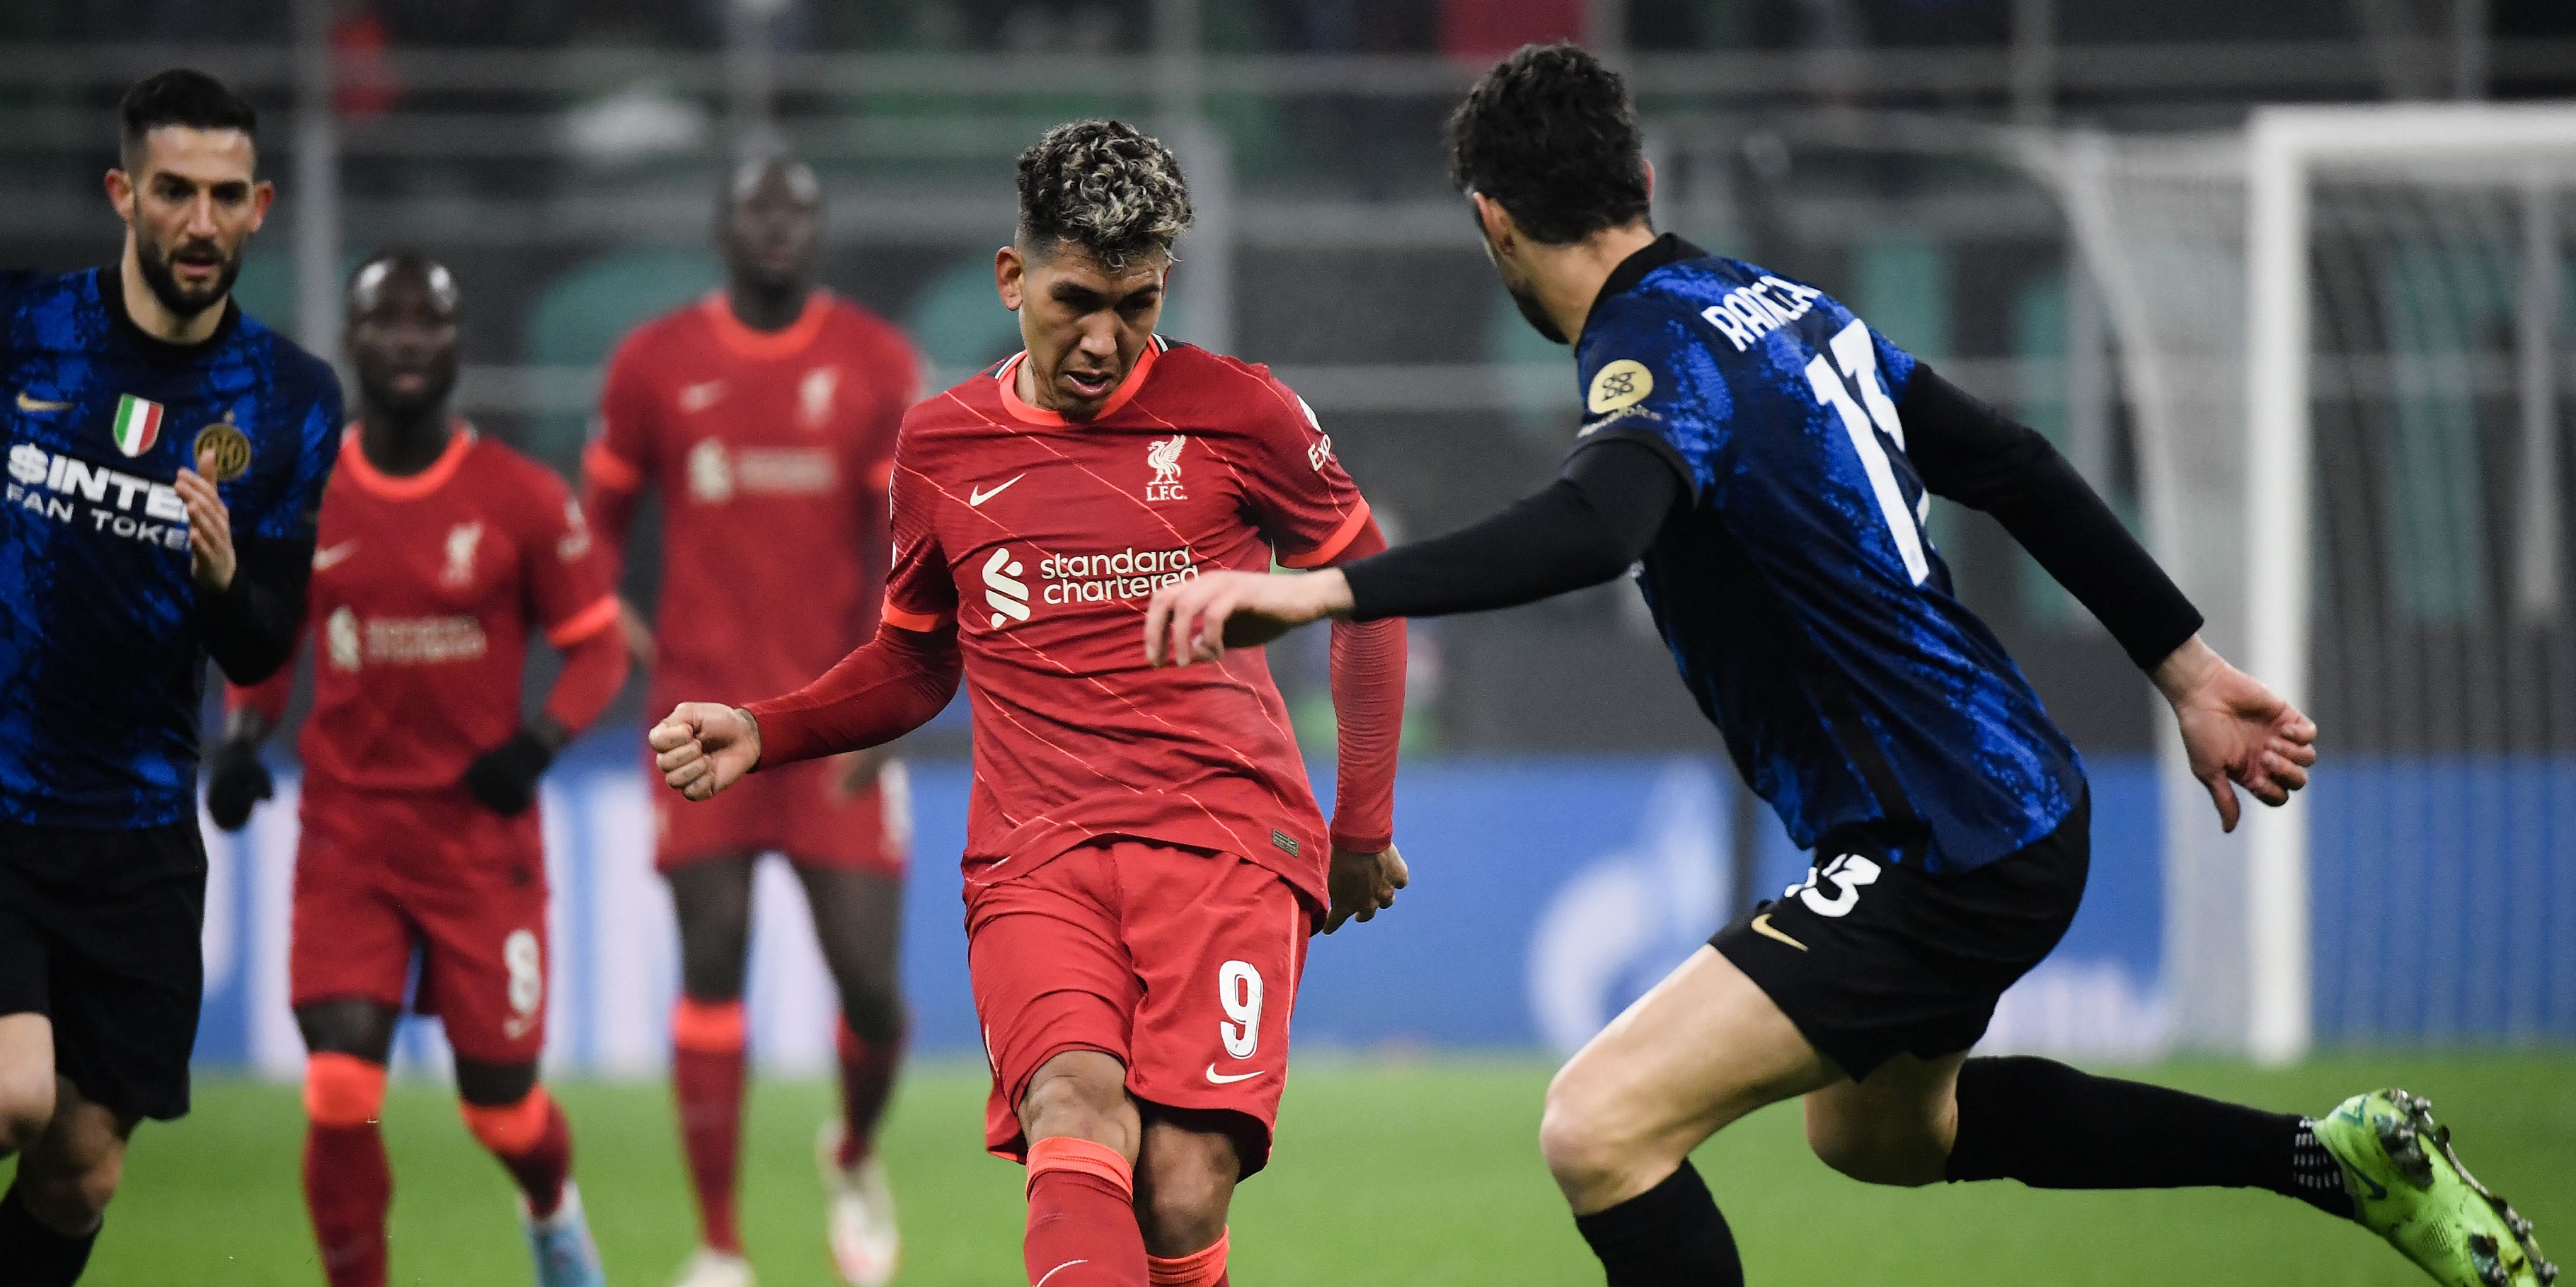 Liverpool may move for potential Firmino replacement in the summer – Reds were tracking 12-goal ace before Jota signing – Calciomercato